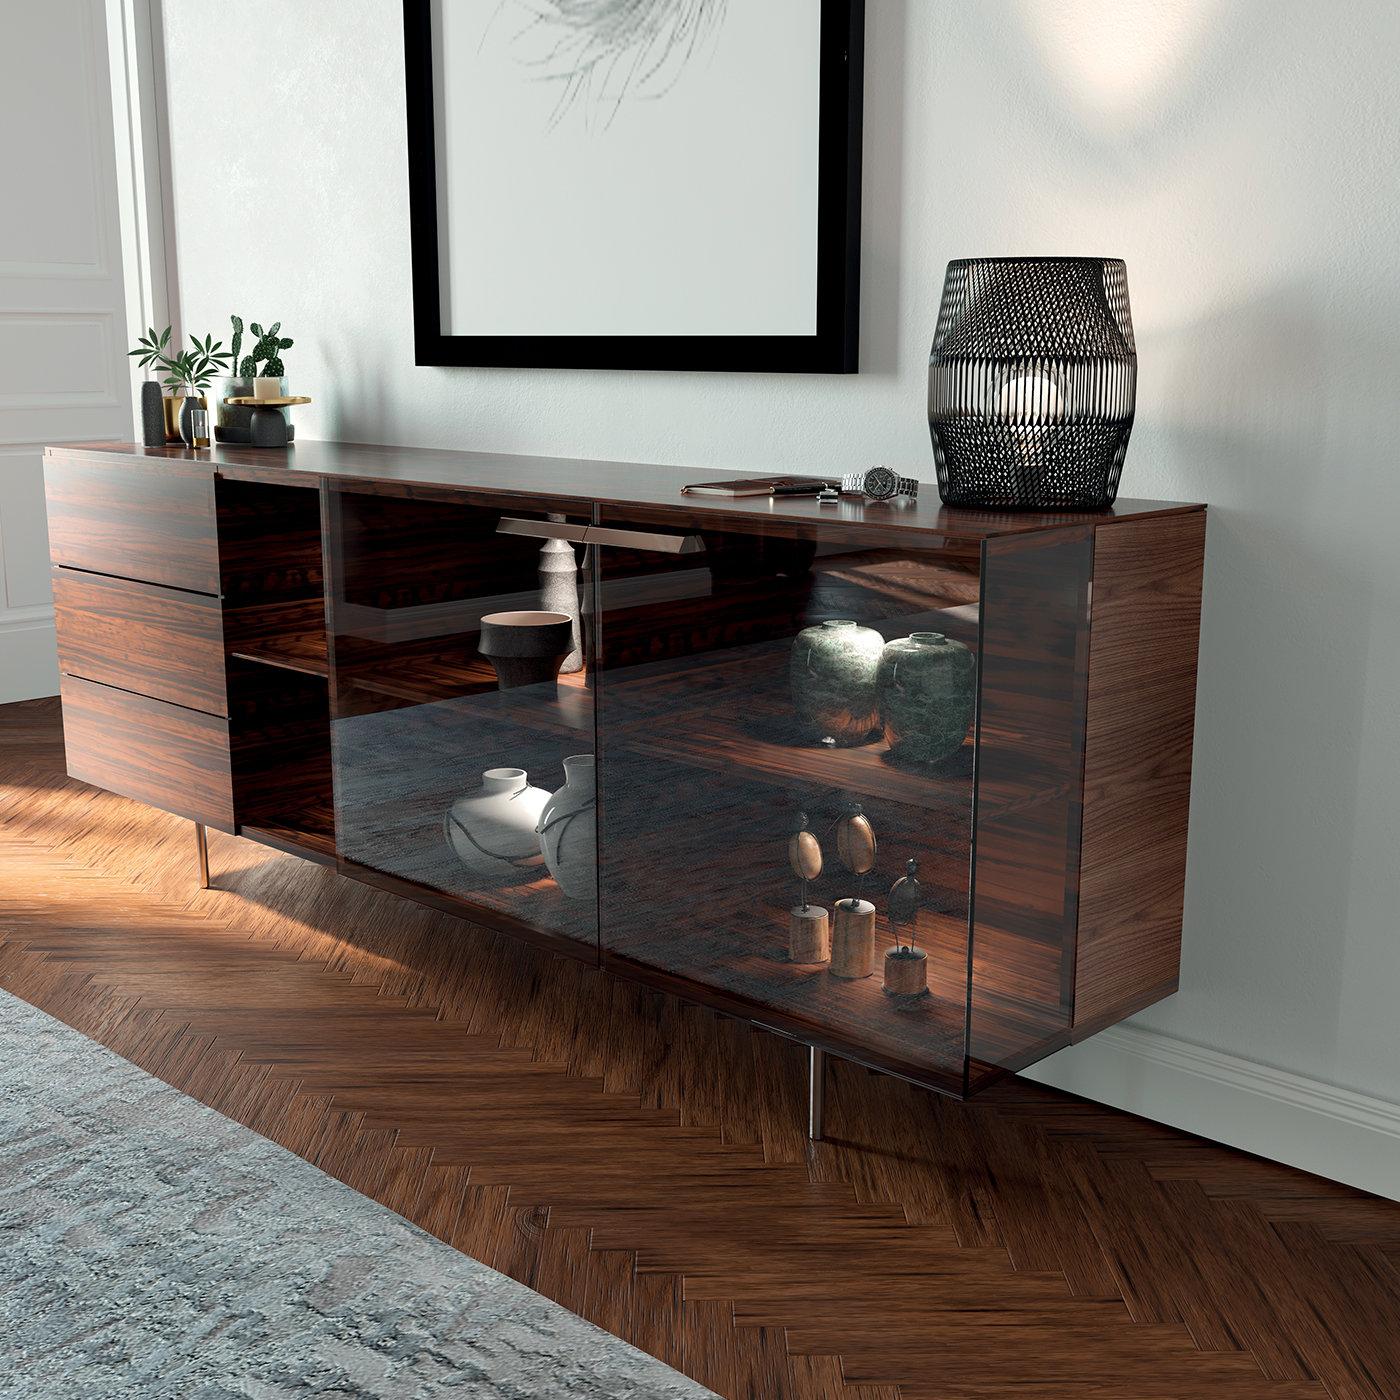 A stylish and functional furnishing item, the Star Sideboard, by Cesare Arosio has been crafted with a structure and drawers in canaletto walnut and features glass doors and a base in painted metal. With available finishes of canaletto walnut or